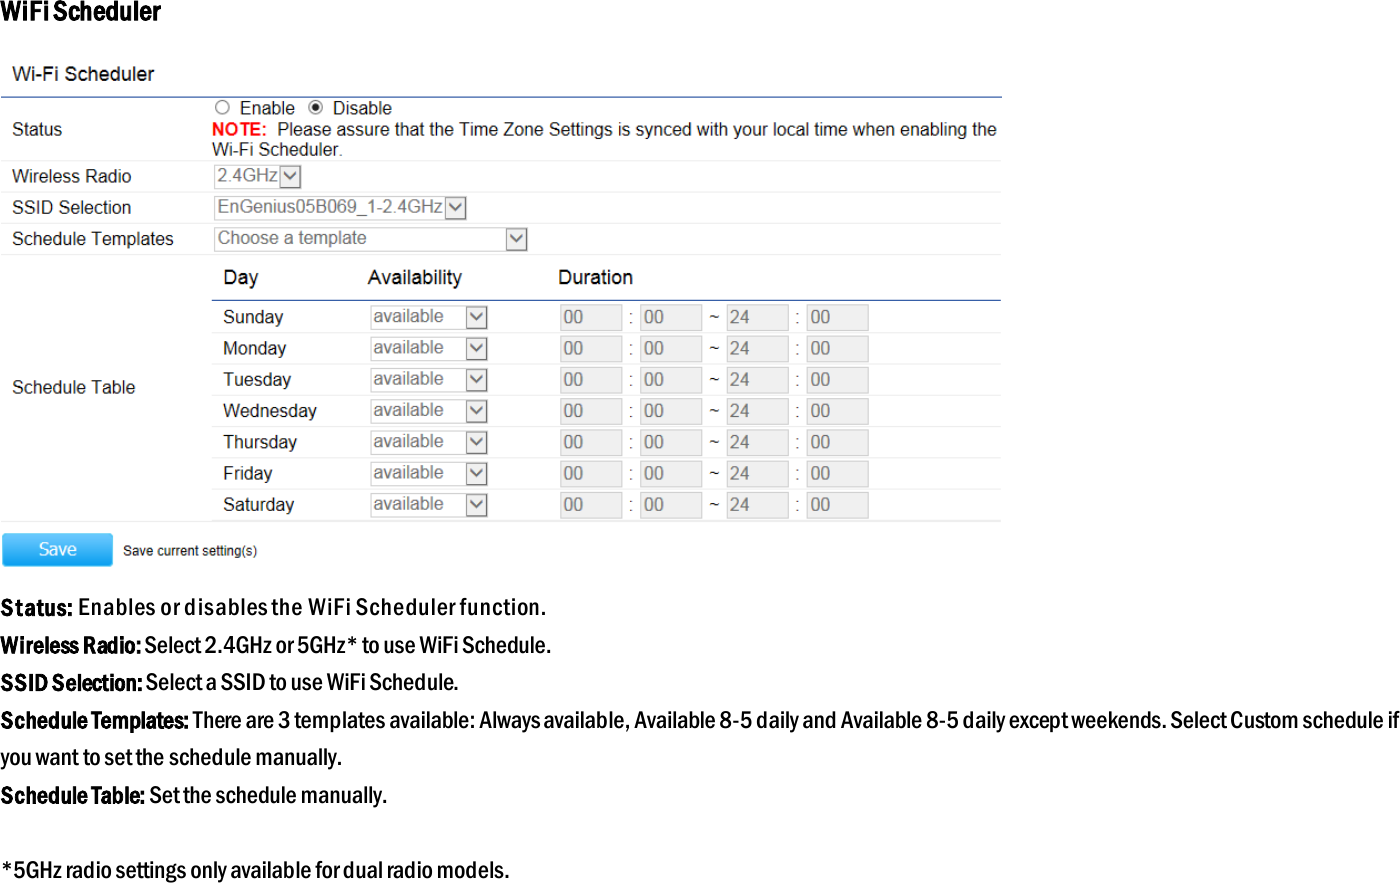 WiFi Scheduler  Status: Enables or disables the WiFi Scheduler function. Wireless Radio: Select 2.4GHz or 5GHz* to use WiFi Schedule. SSID Selection: Select a SSID to use WiFi Schedule. Schedule Templates: There are 3 templates available: Always available, Available 8-5 daily and Available 8-5 daily except weekends. Select Custom schedule if you want to set the schedule manually. Schedule Table: Set the schedule manually.  *5GHz radio settings only available for dual radio models.